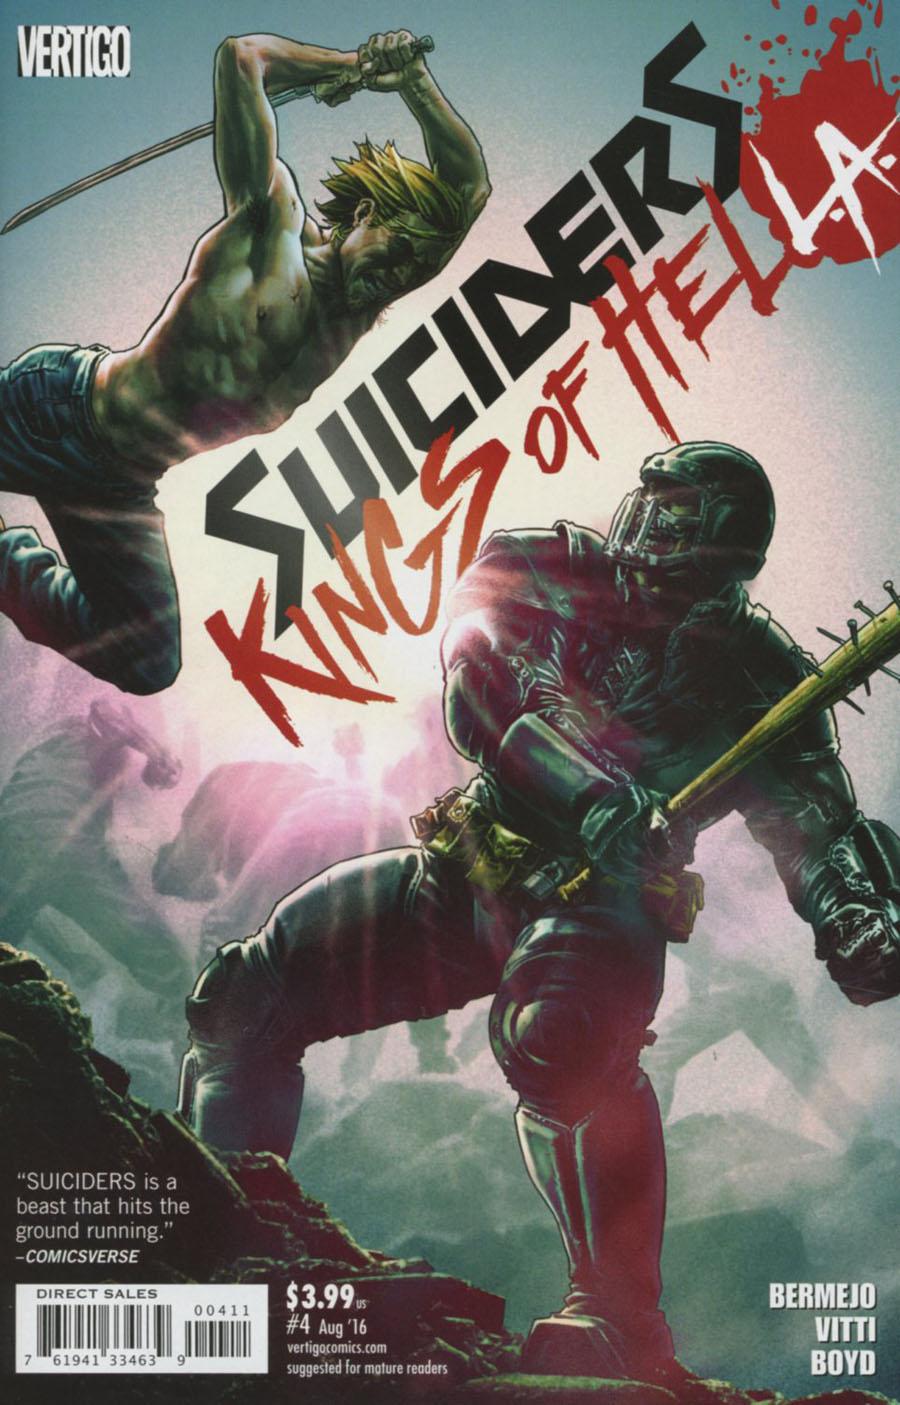 Suiciders Kings Of HelL.A. Vol. 1 #4